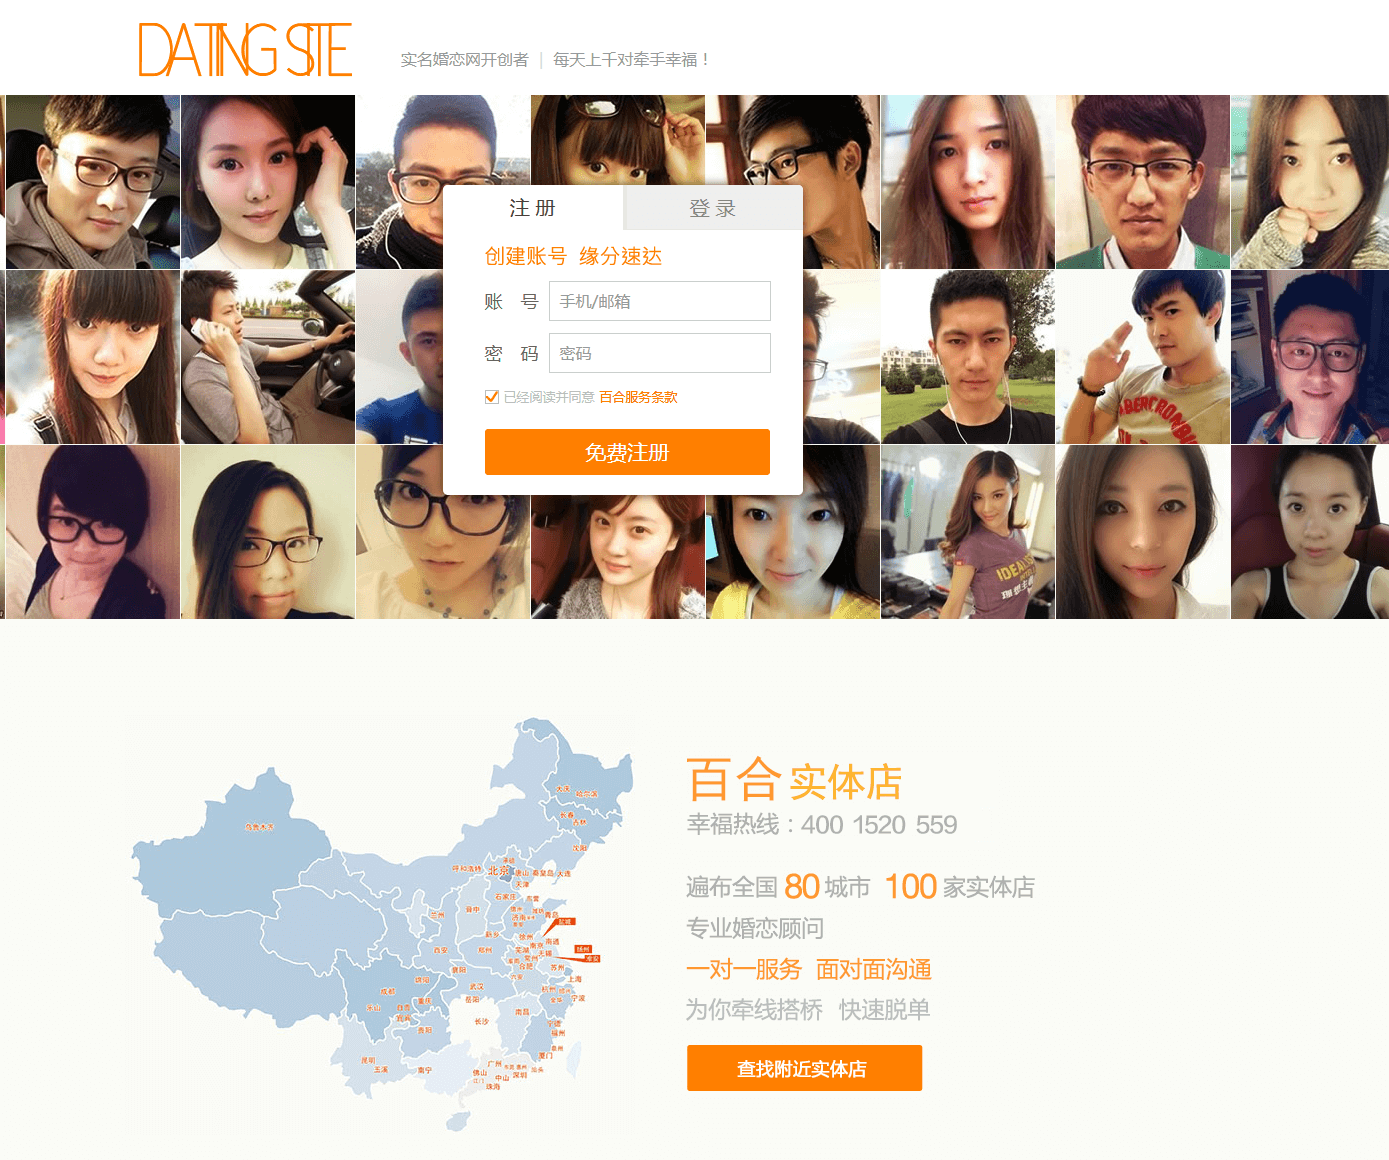 Orange dating website - Receive a dating website with the special Orange design theme